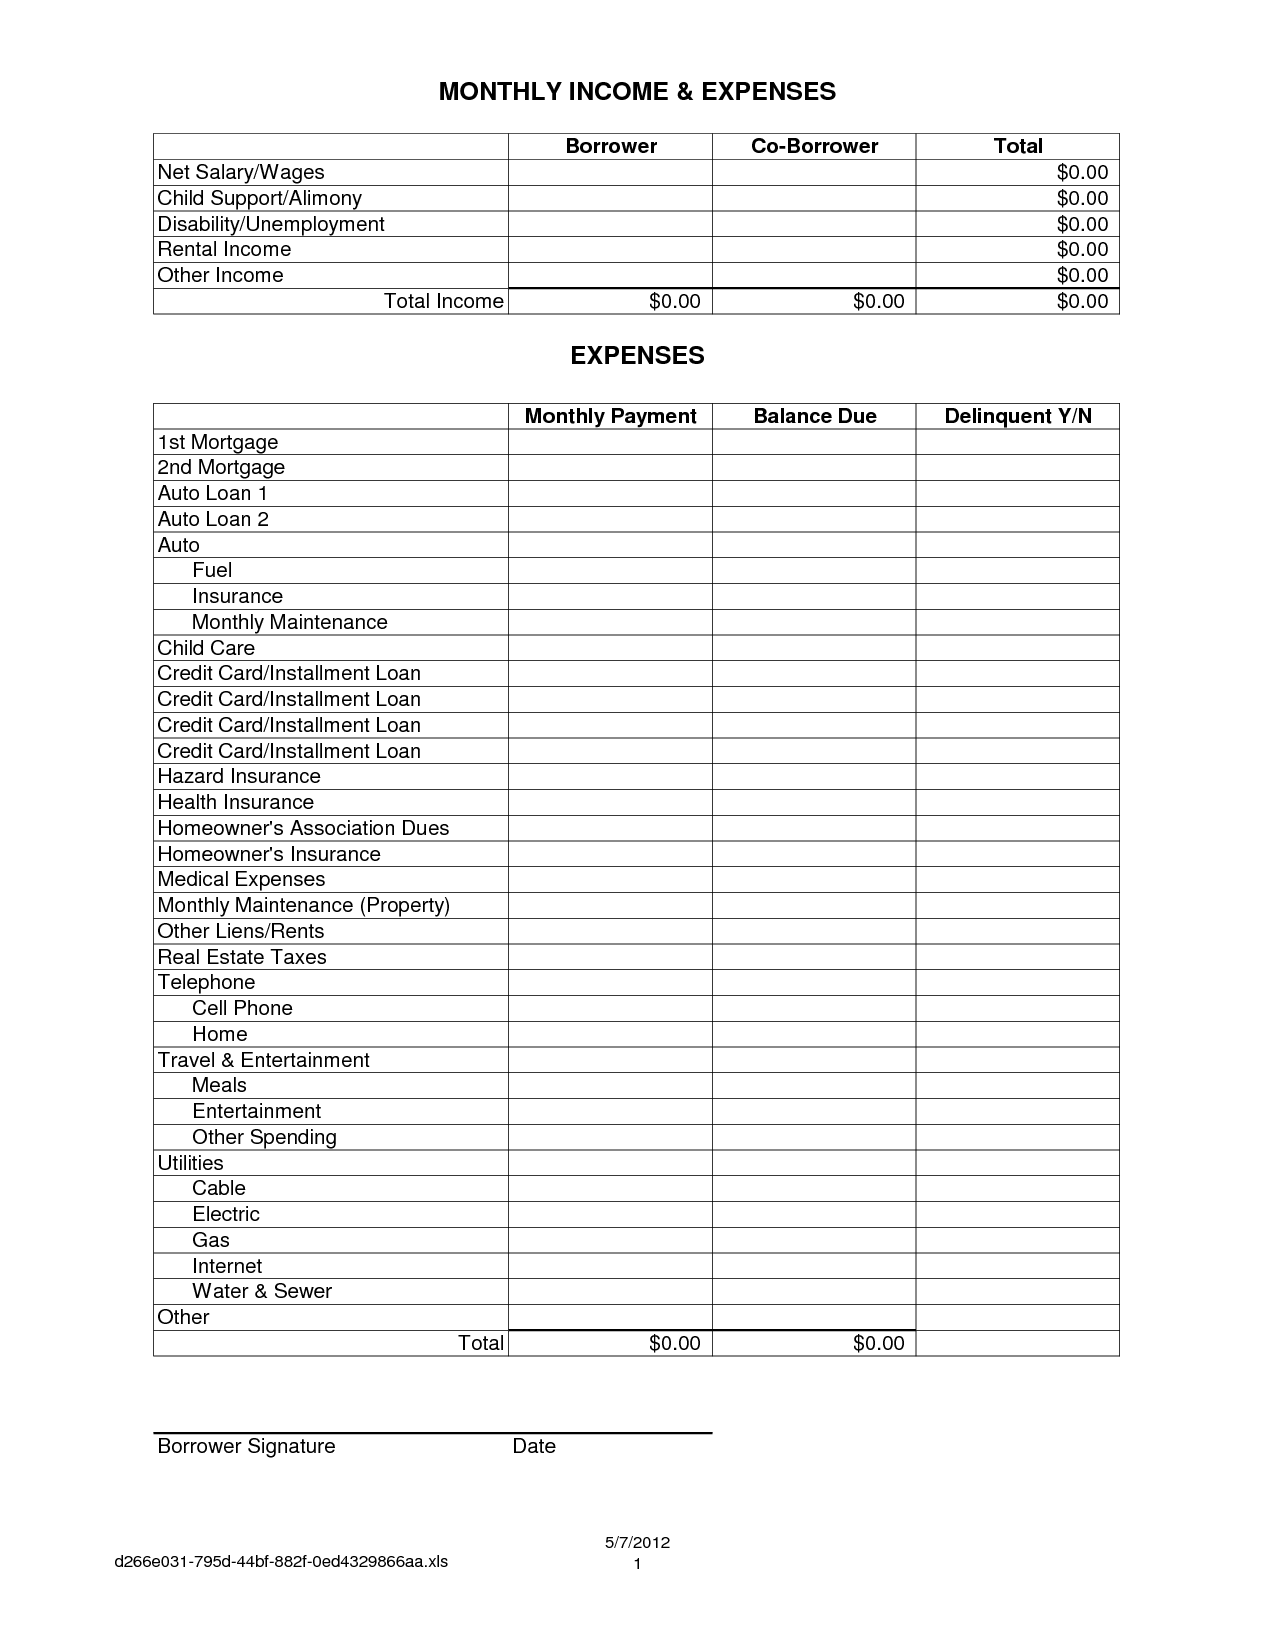 printable-income-and-expenditure-form-template-printable-forms-free